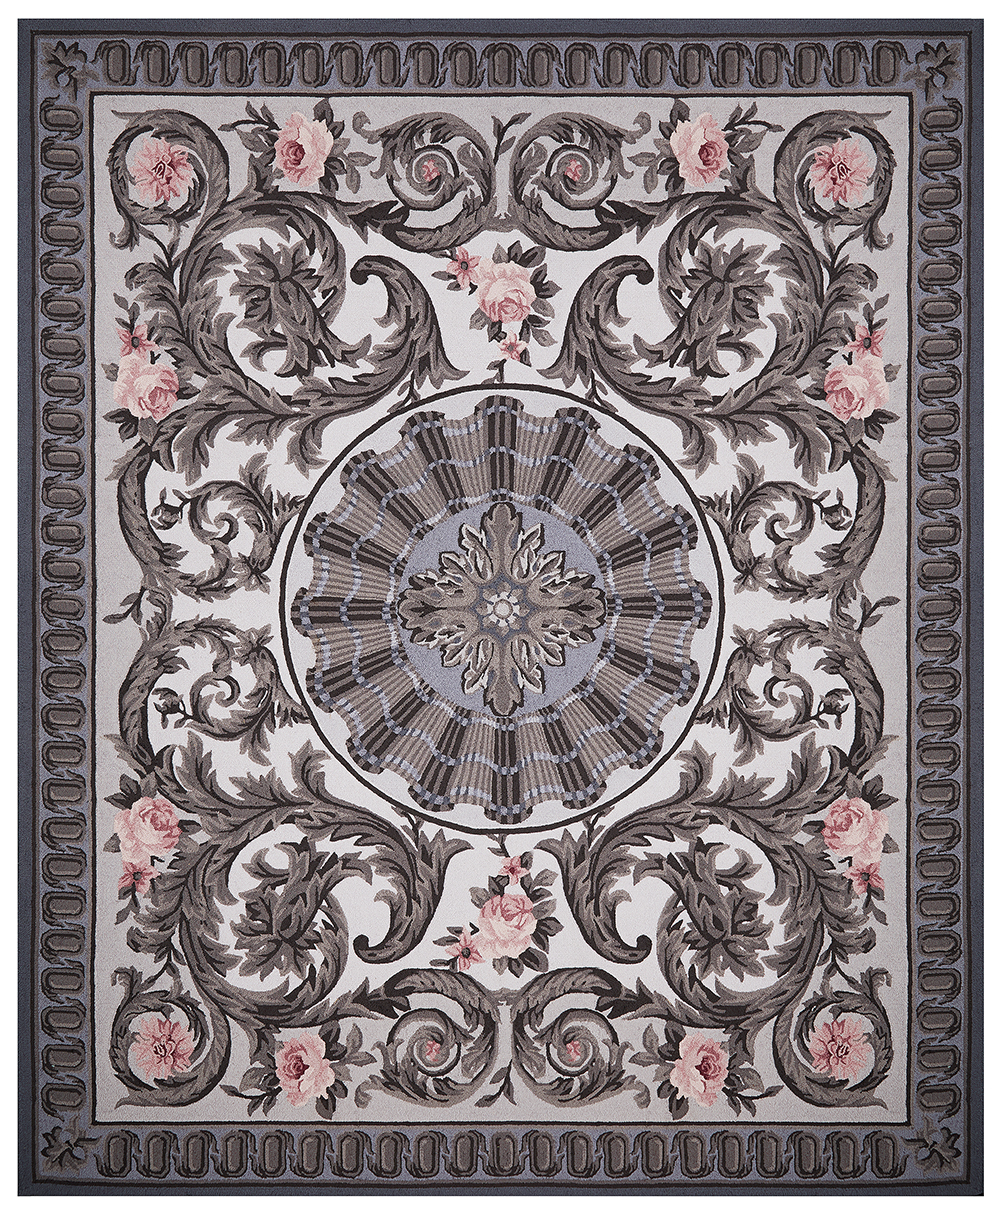 YVES_Heritage Collection_By Loomah Bespoke Carpets & Rugs